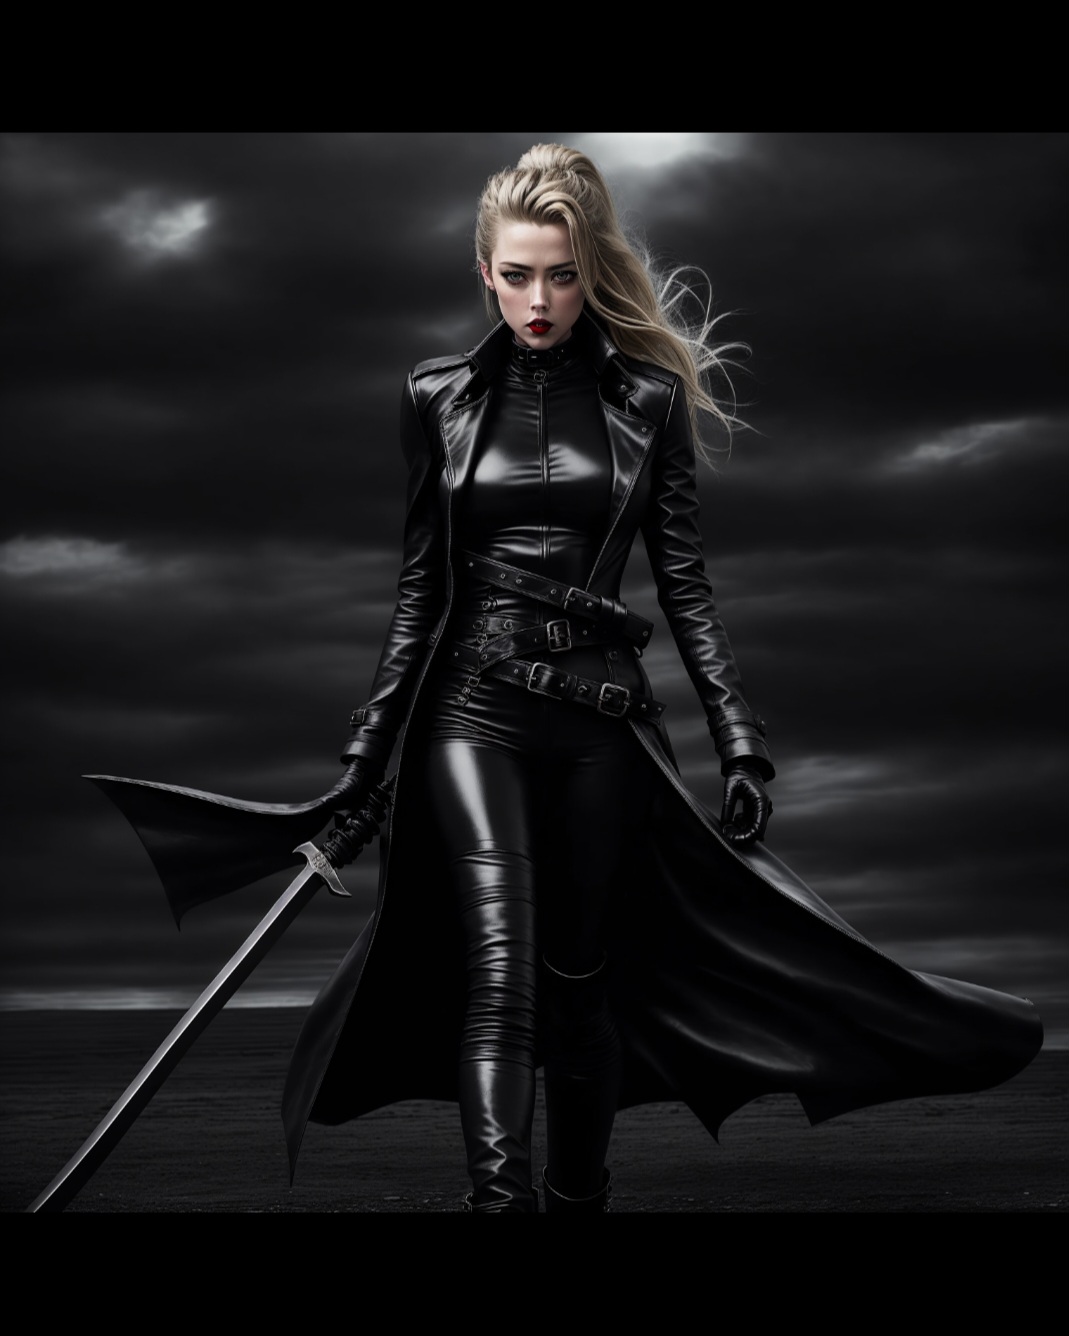 Amber Heard as 'Salome the Blade' (v.2) by fettaboba on DeviantArt